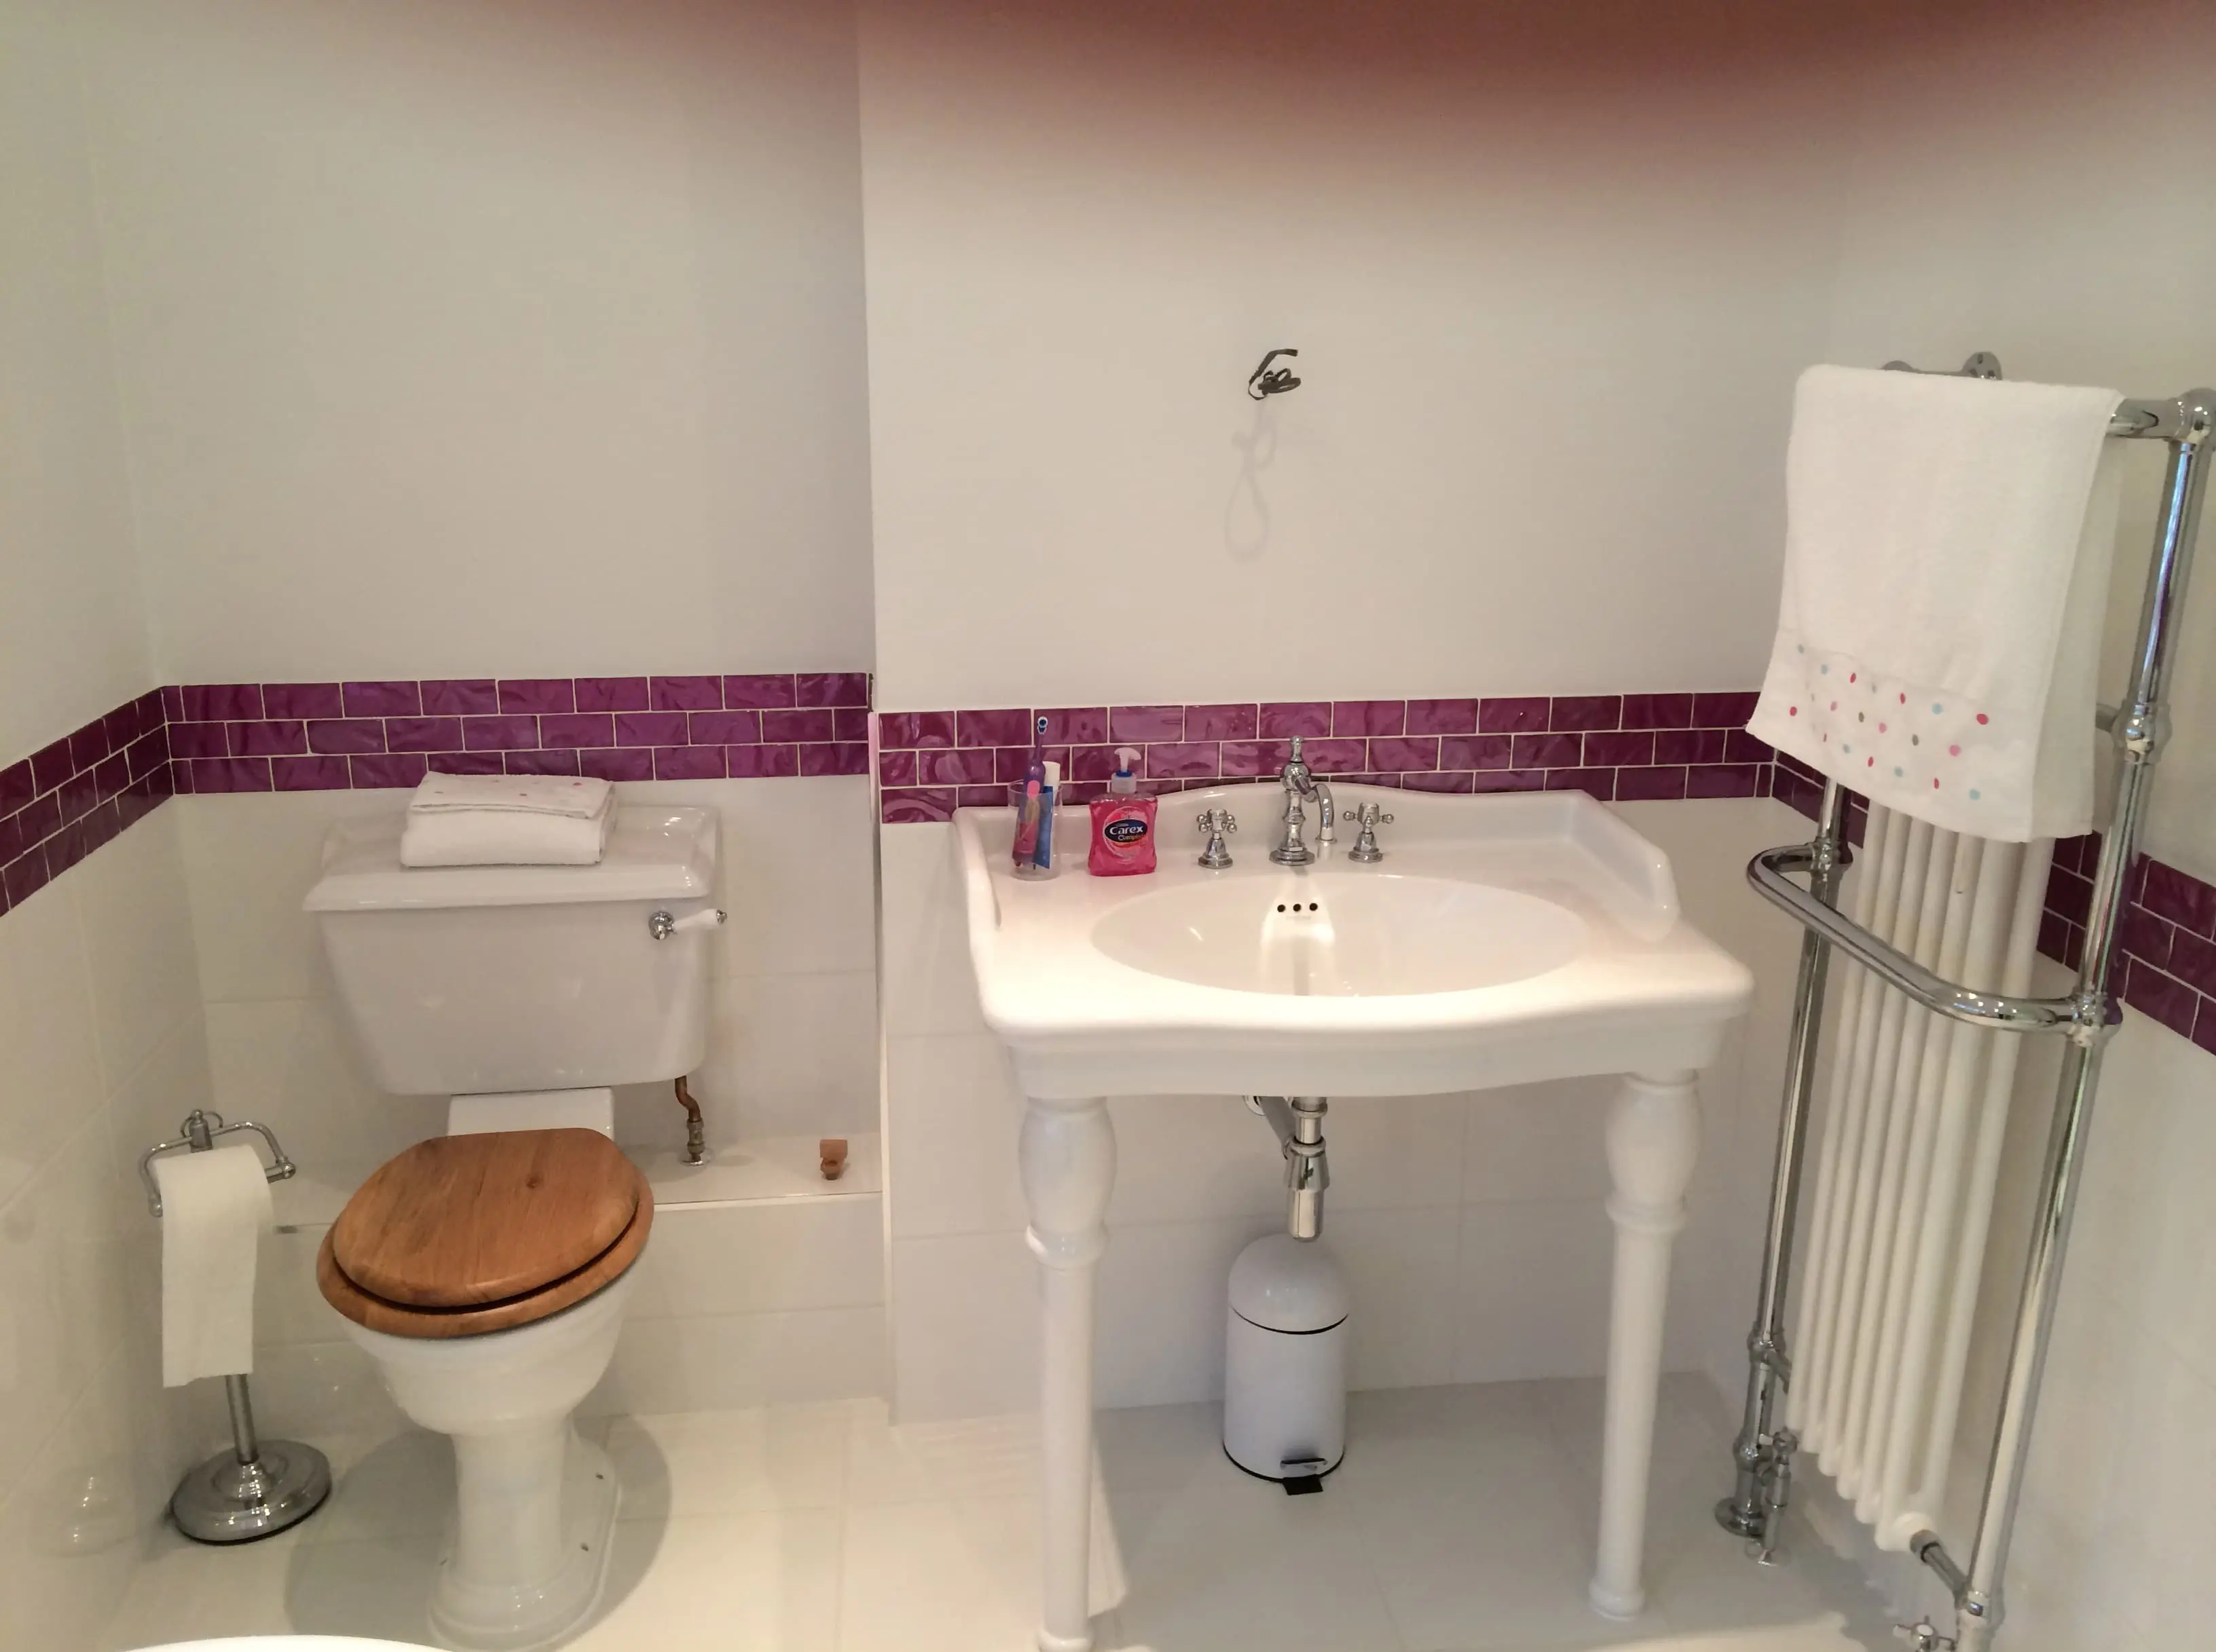 With&nbsp;over 42 years of experience, I can supply and fit bathroom fittings at competitive prices in the following areas:ReadingShinfieldCalcotWokinghamBracknellWoodleyAnd many areas more in and around&nbsp;Whitley!Whether you want me to install a&nbsp;new&nbsp;wet room&nbsp;or just&nbsp;re-tile&nbsp;your existing bathroom, I can give your home a new look. I take great pride in providing a personalised service to&nbsp;suit your budget and taste.&nbsp;